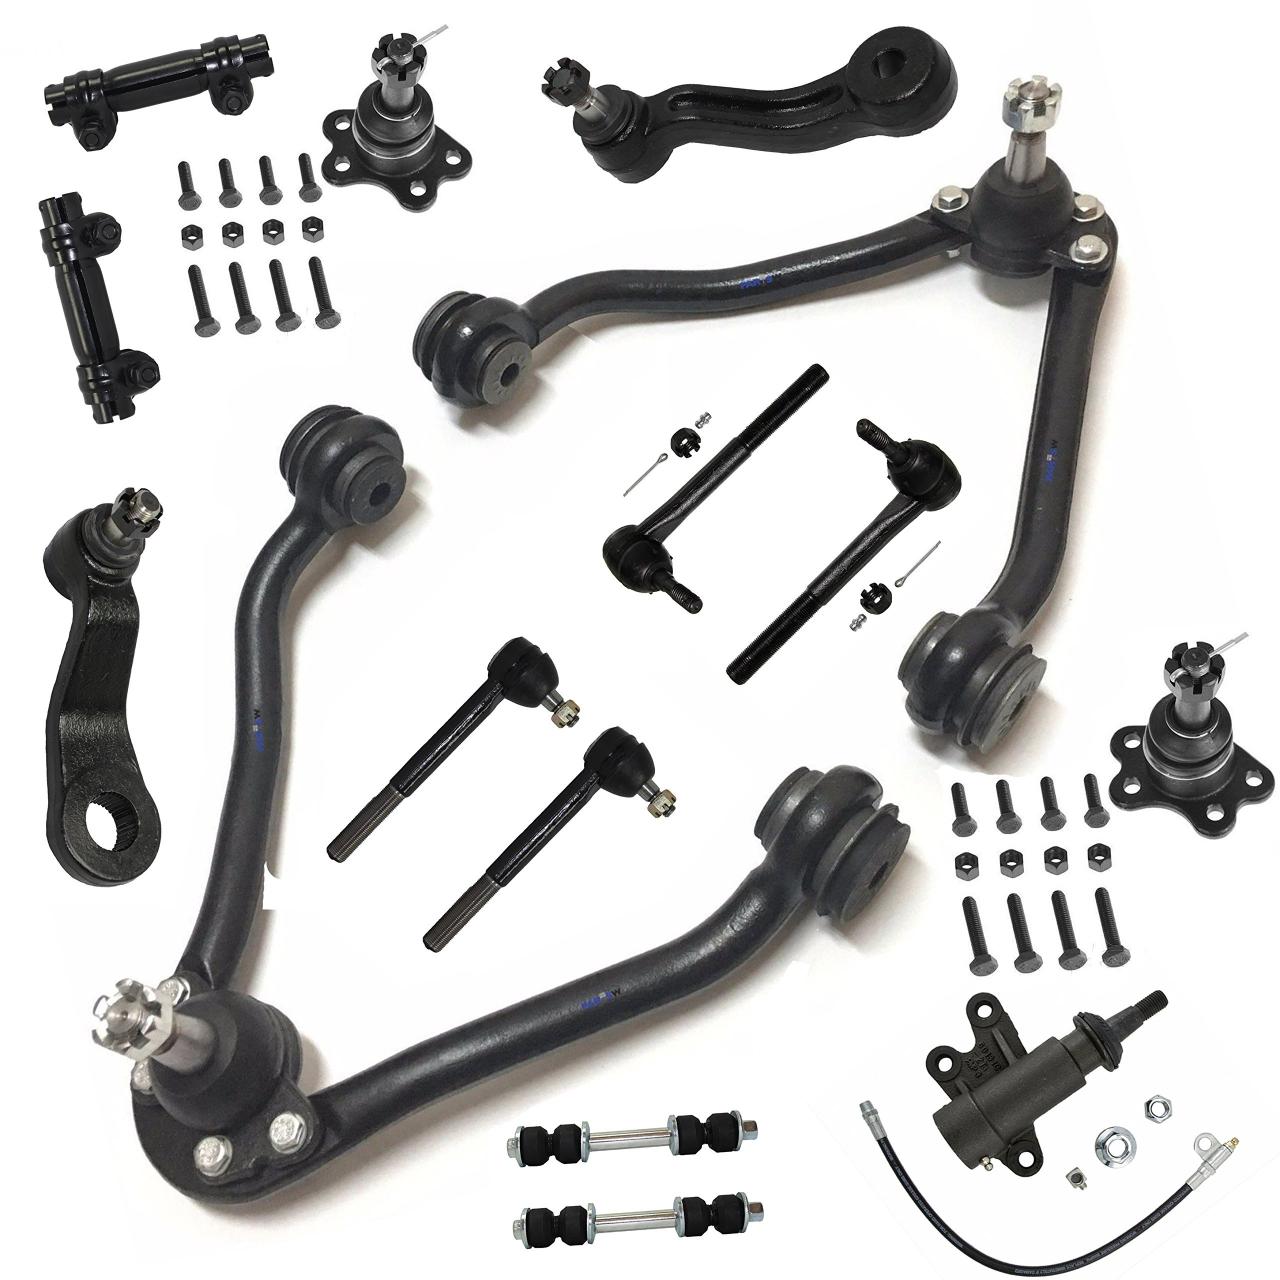 Detroit Axle - New 15pc Complete Front Upper Control Arm and Ball Joint  Suspension Kit for Chevrolet and GMC Trucks C1500 C2500 C3506- Buy Online  in Bahrain at bahrain.desertcart.com. ProductId : 92310189.